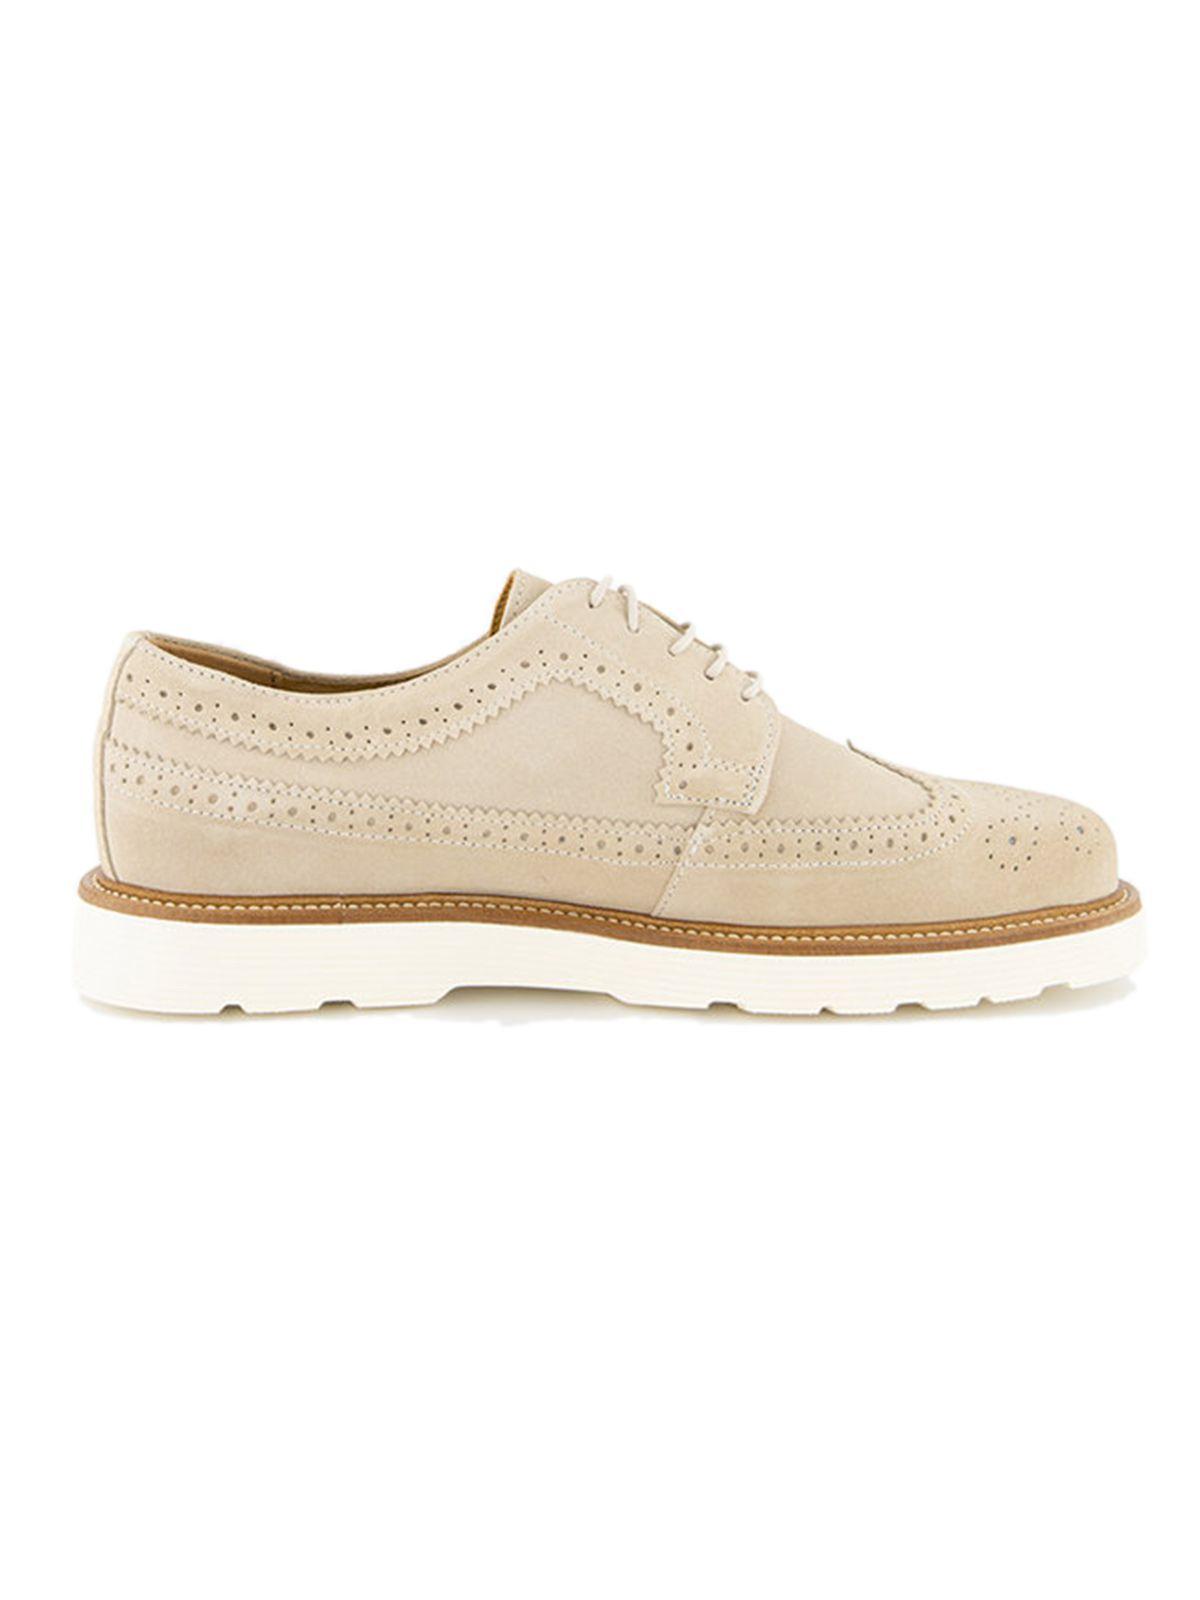 GANT Suede Lace-up Shoes in Beige (Natural) for Men - Lyst